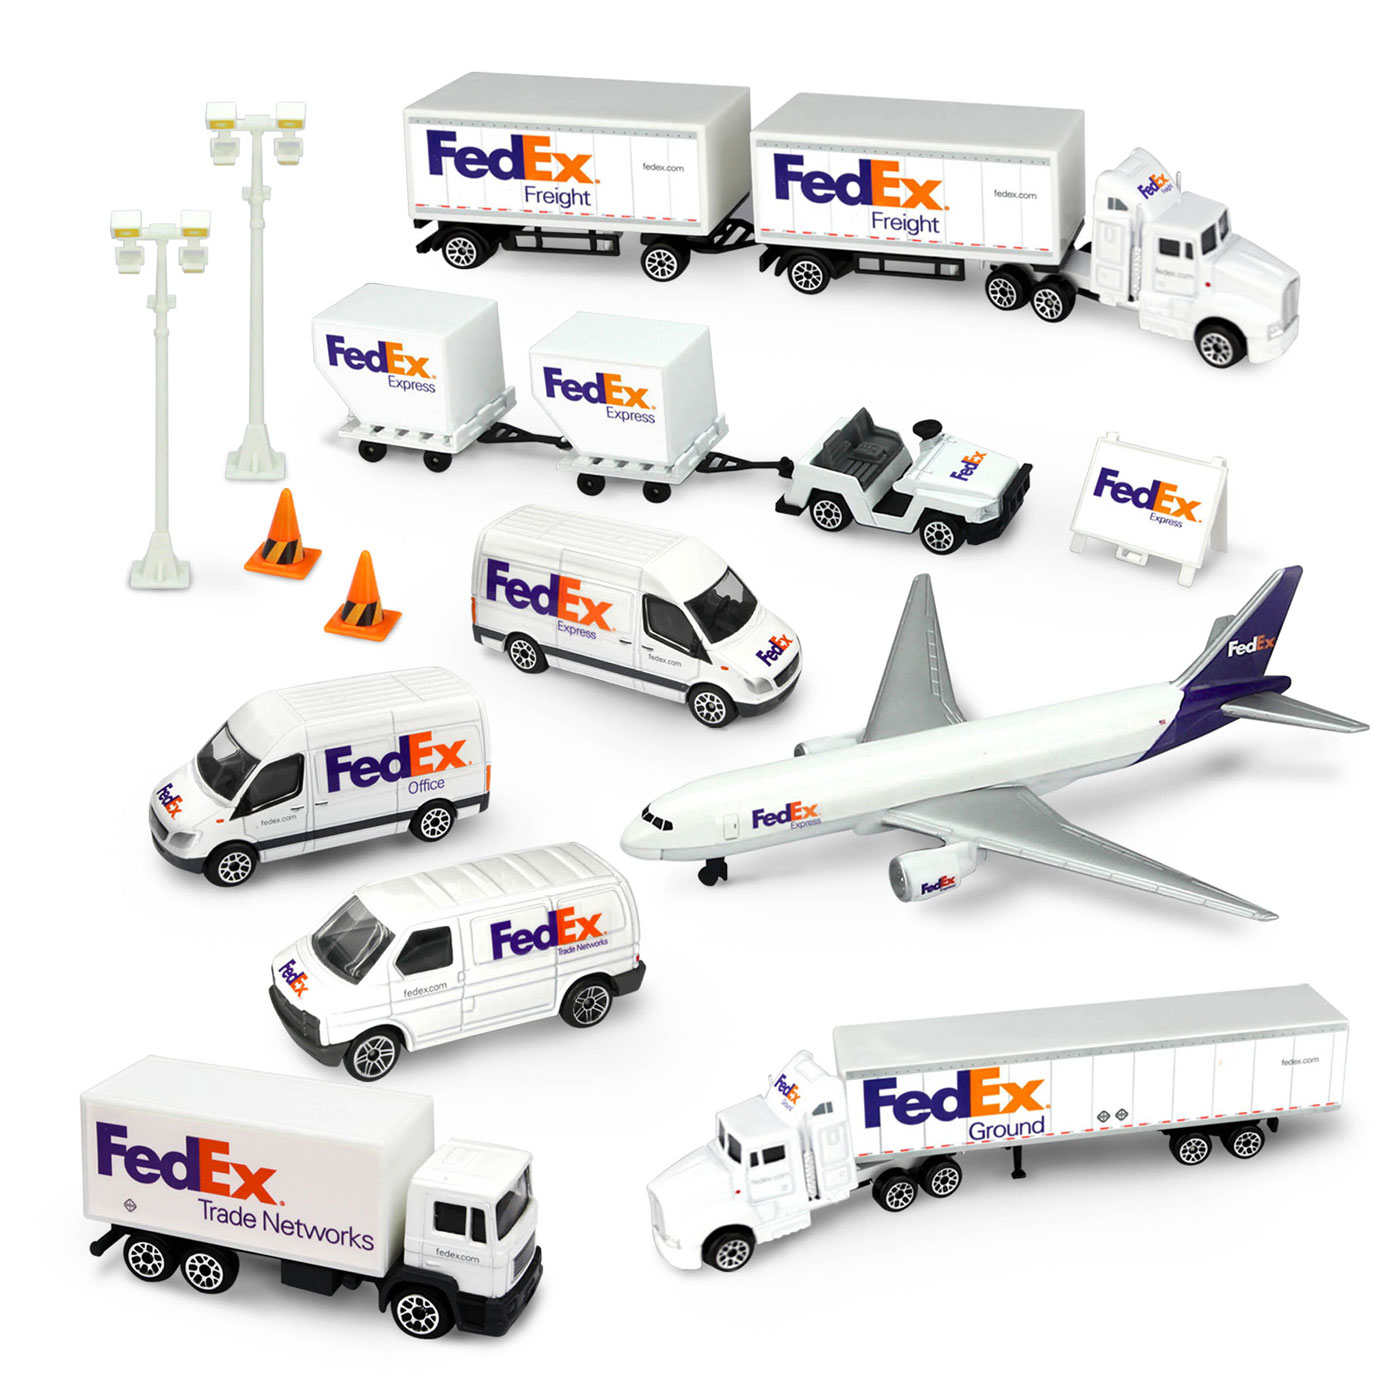 fedex toy delivery truck